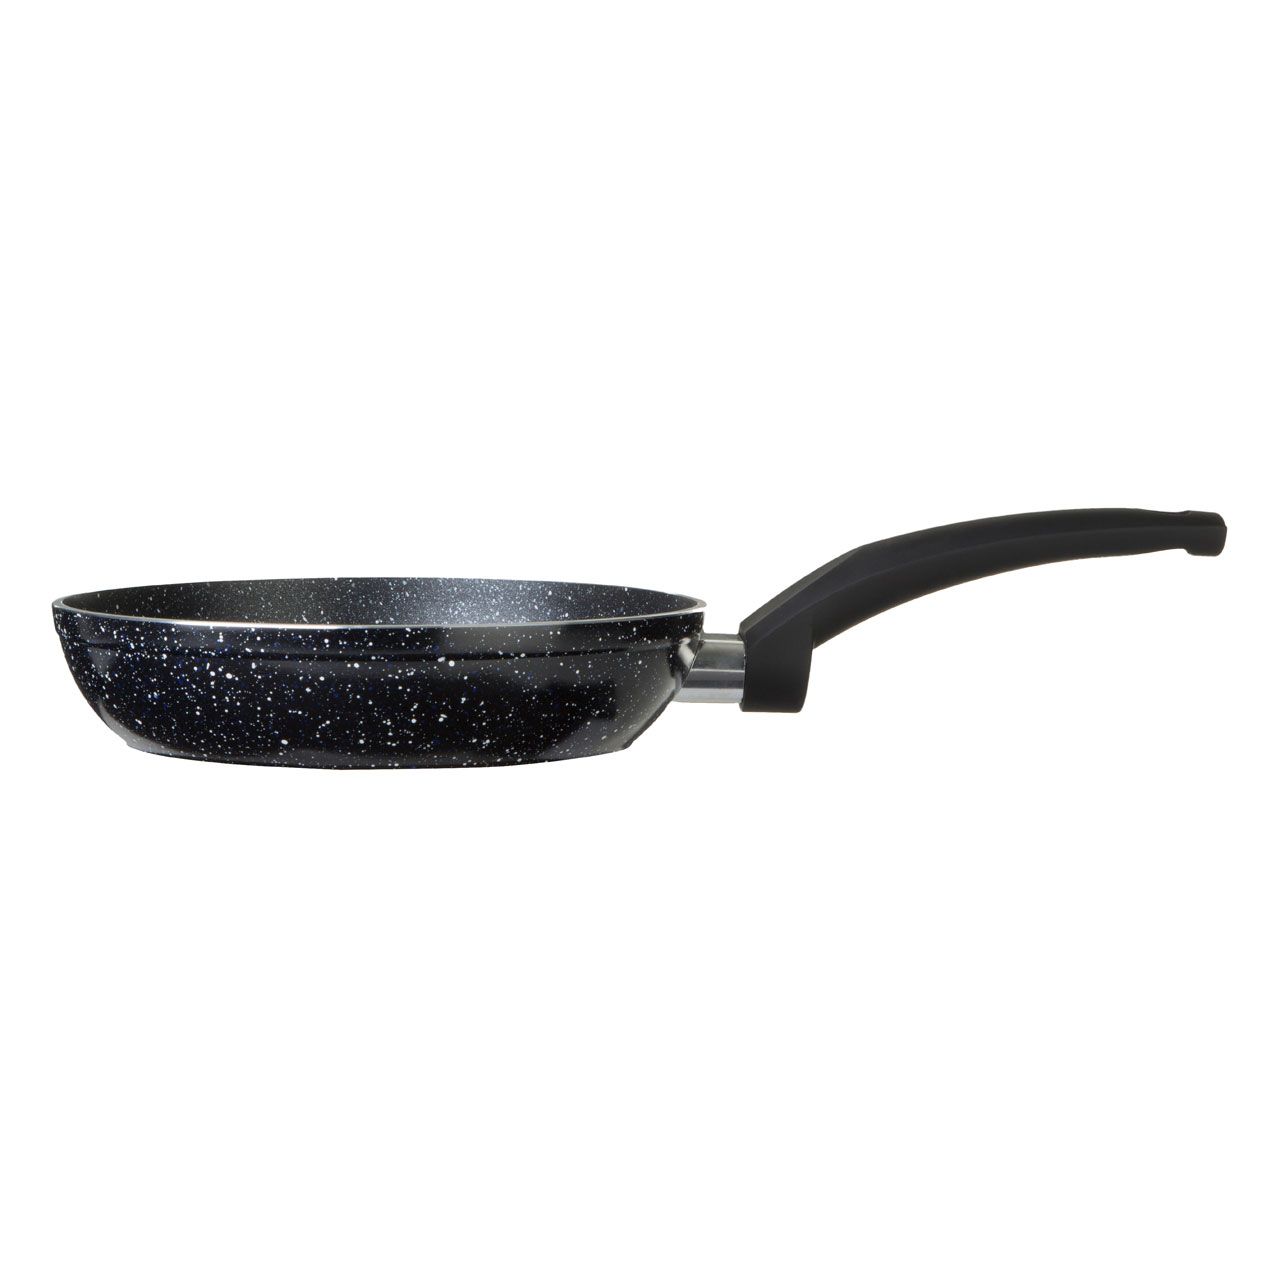 Maison by Premier Stoneflam Forged Aluminium Frying Fry Pan - 20cm